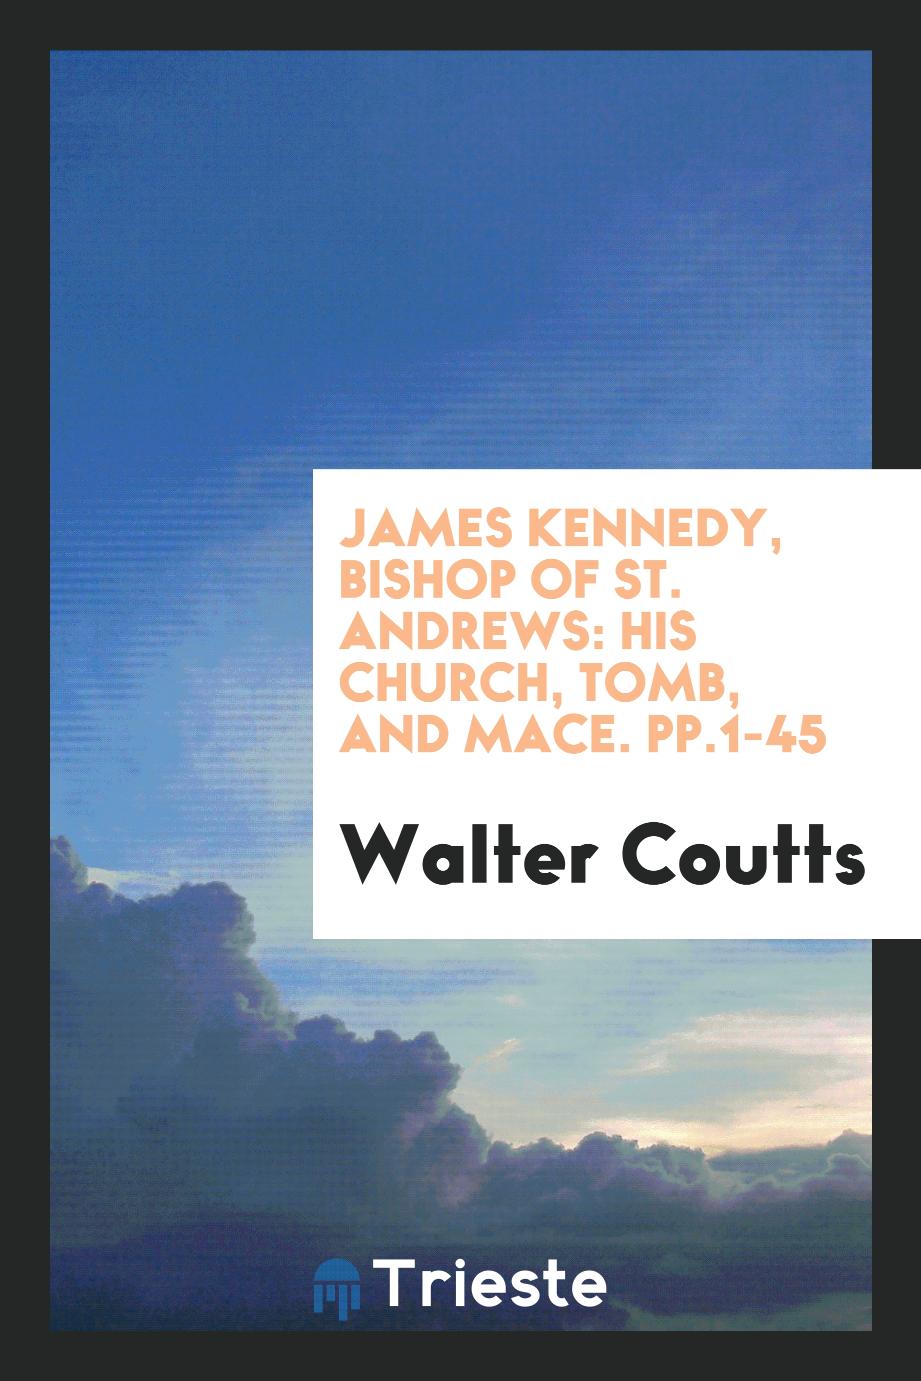 James Kennedy, Bishop of St. Andrews: His Church, Tomb, and Mace. pp.1-45